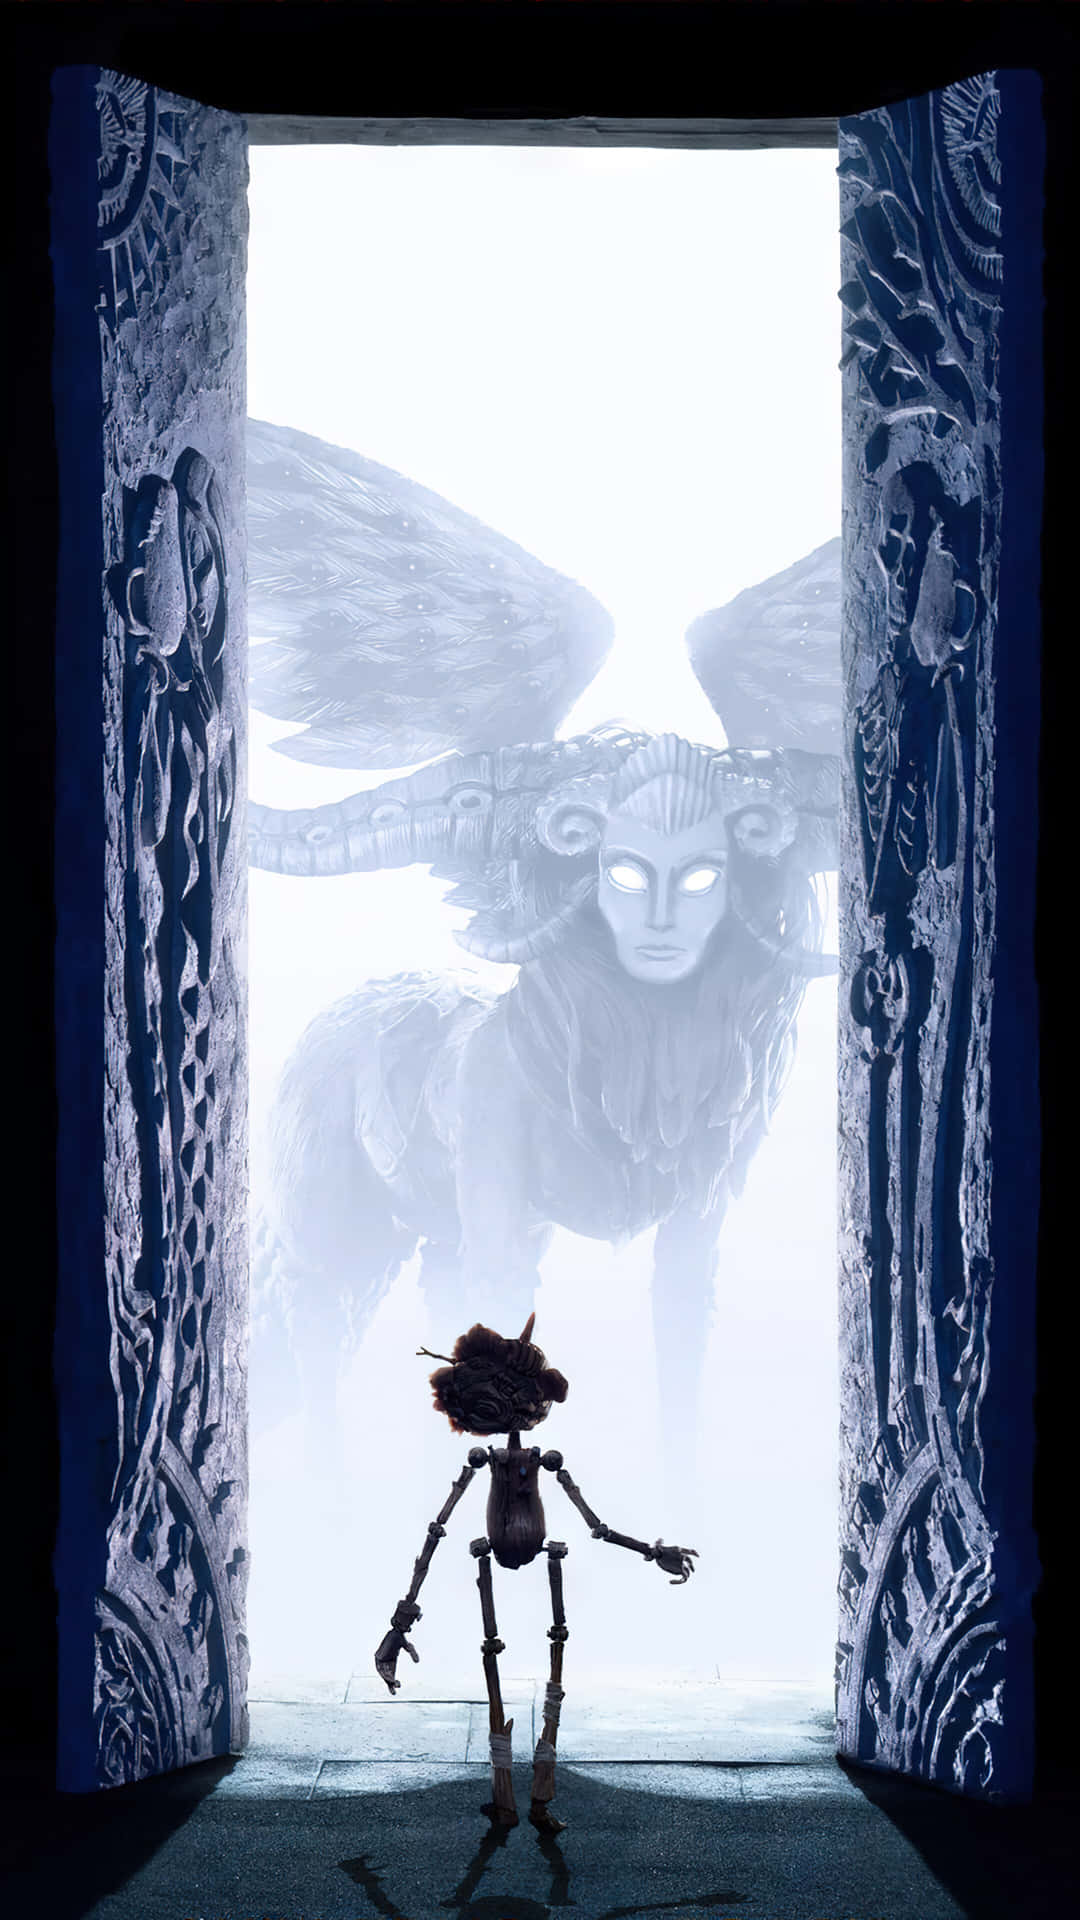 Caption: Guillermo Del Toro's Pinocchio movie poster featuring characters and magical settings Wallpaper